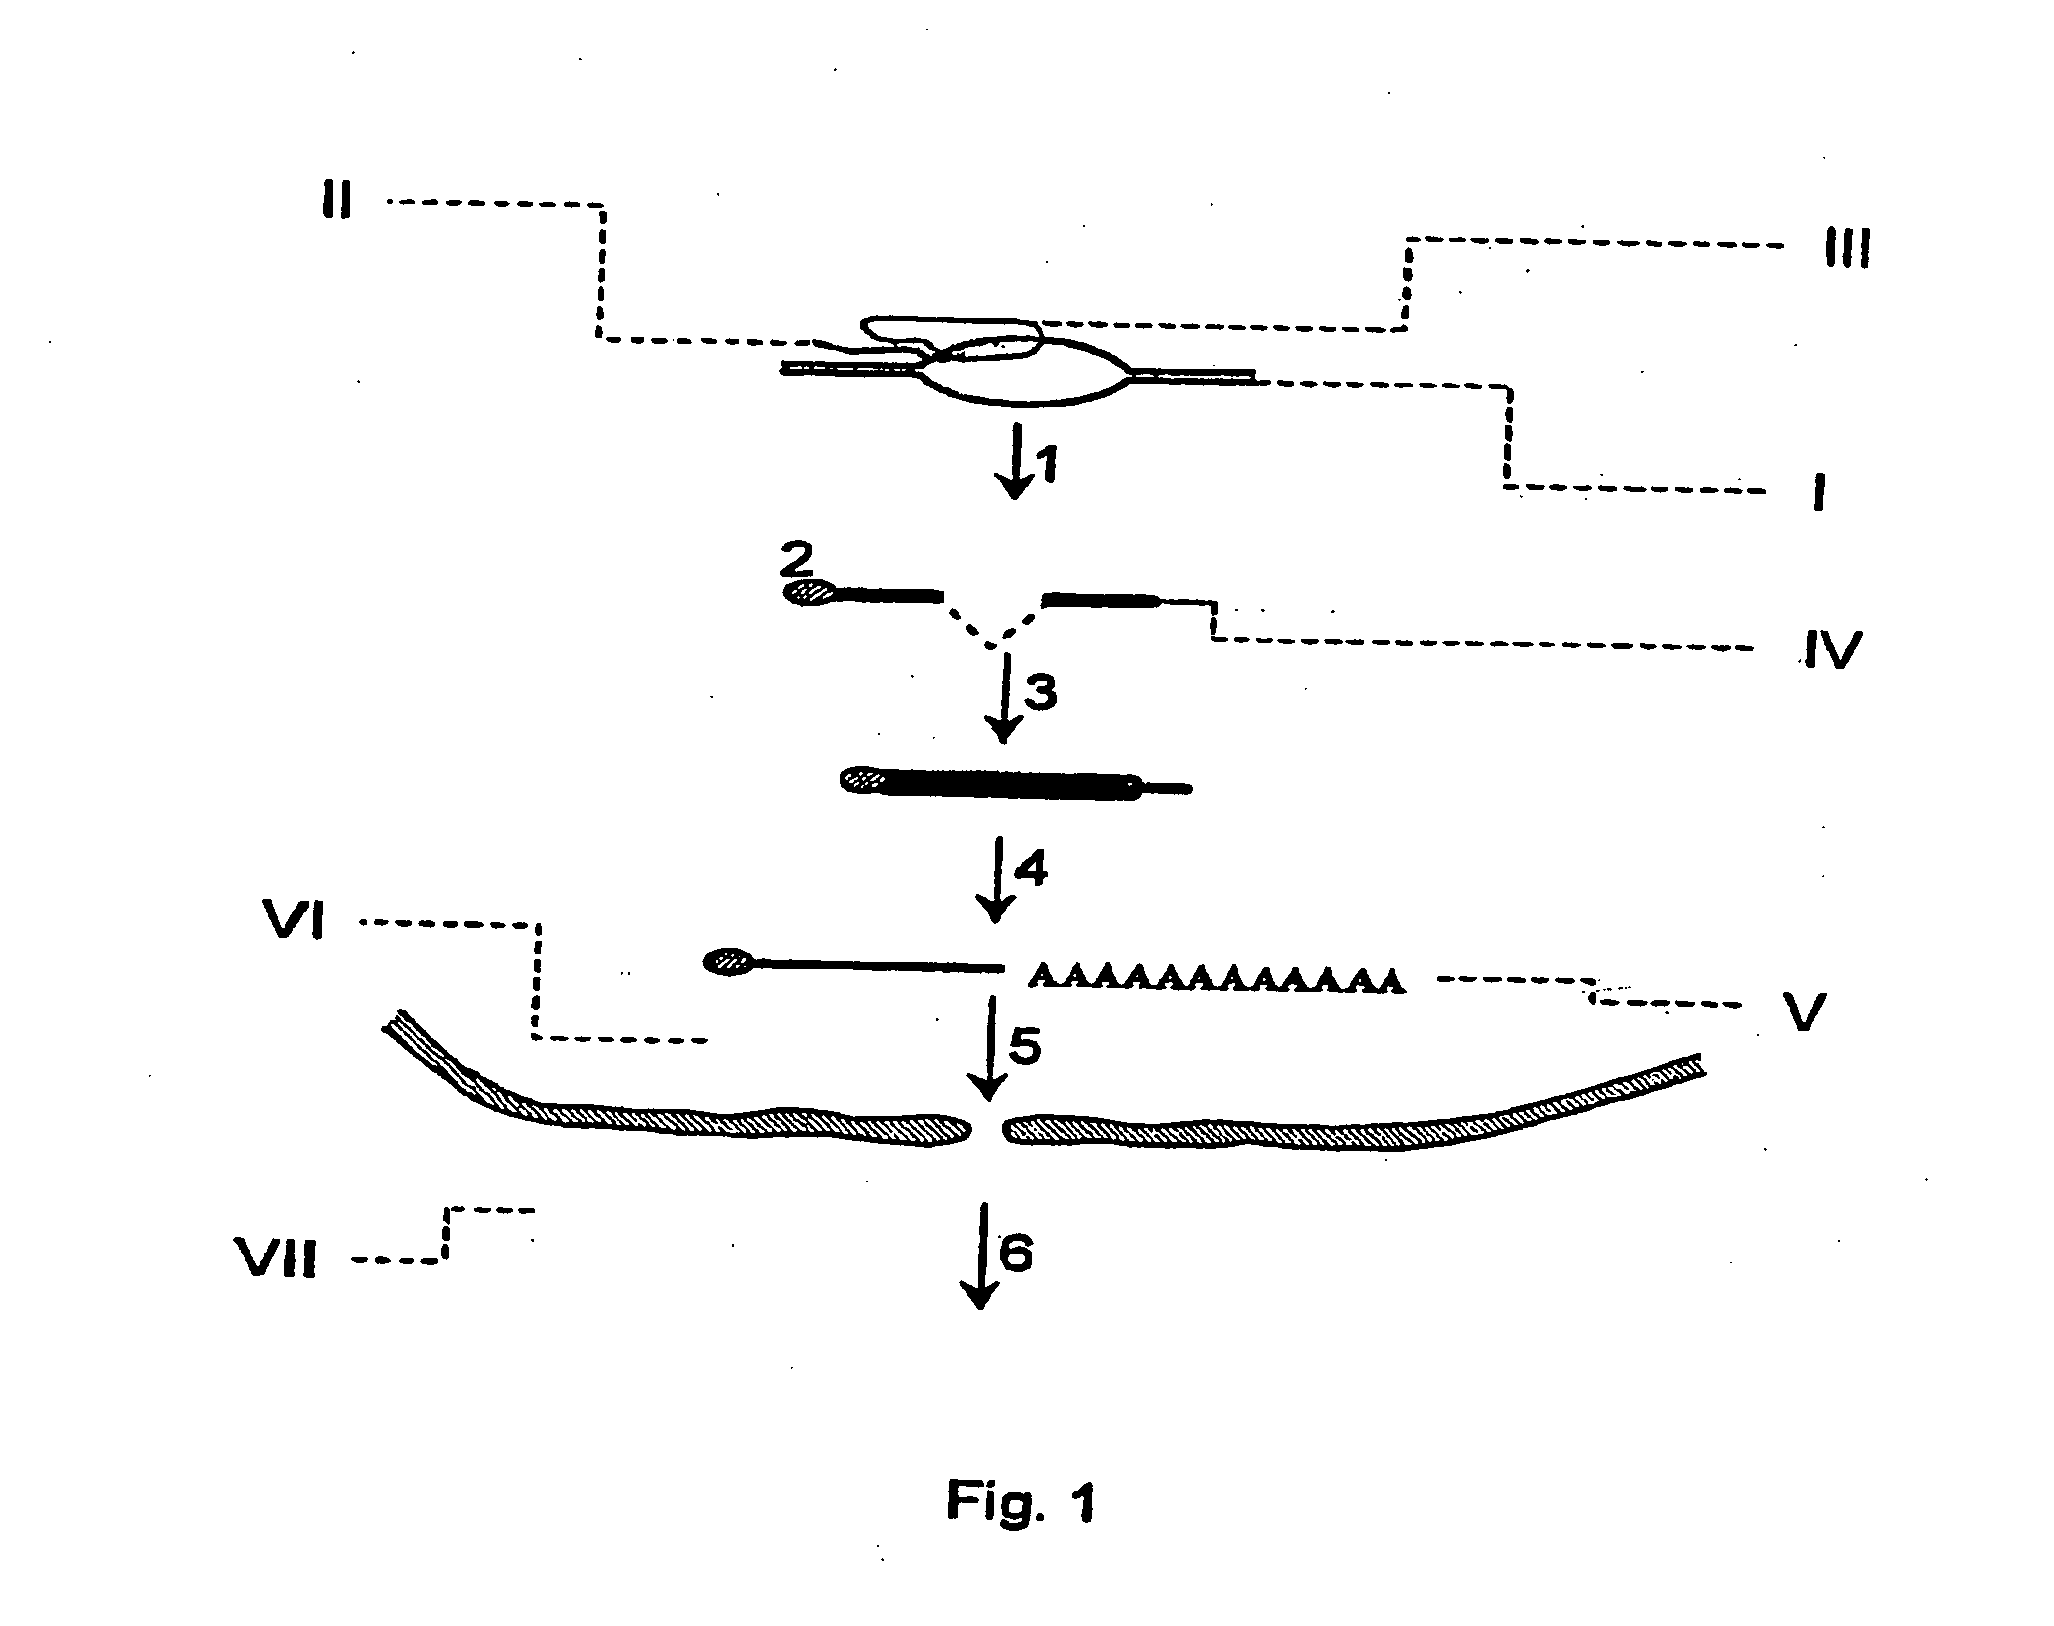 Method of reversible inhibition of gene expression by means of modified ribonucleoproteins